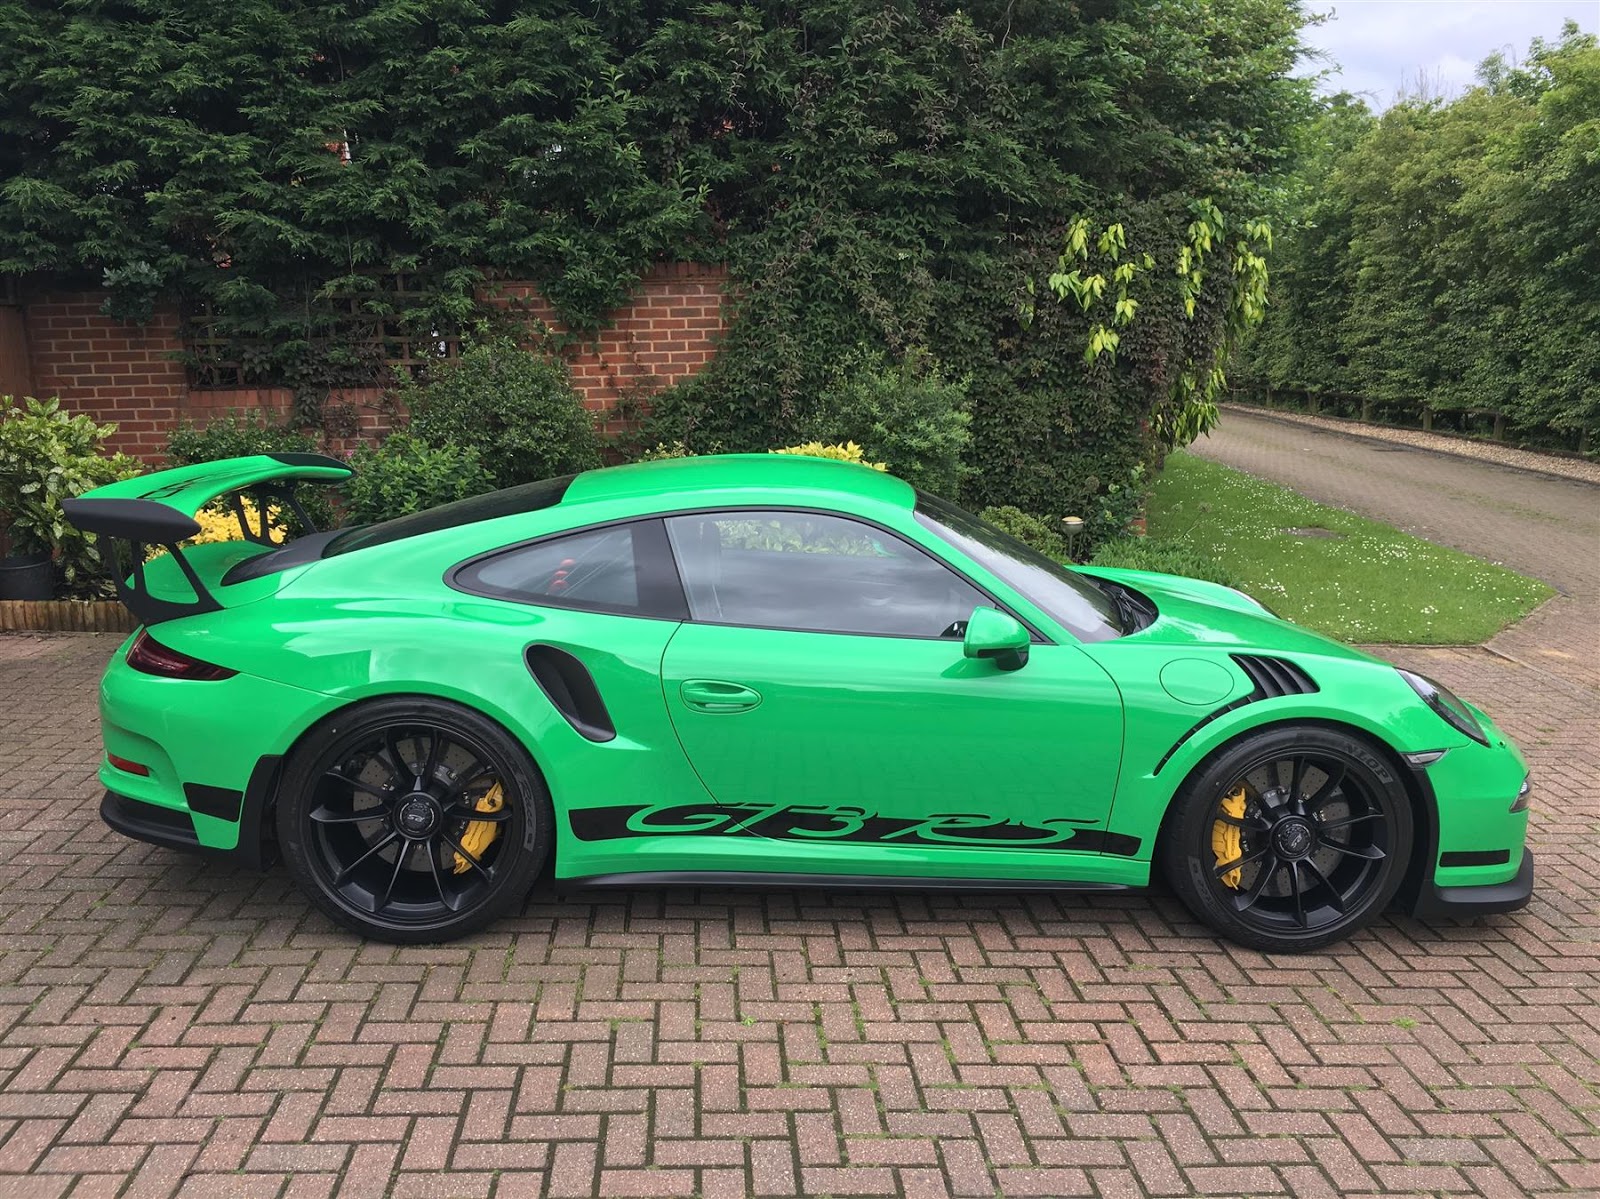 Bright Green Porsche 911 Gt3 Rs For Sale In Uk R43 Million